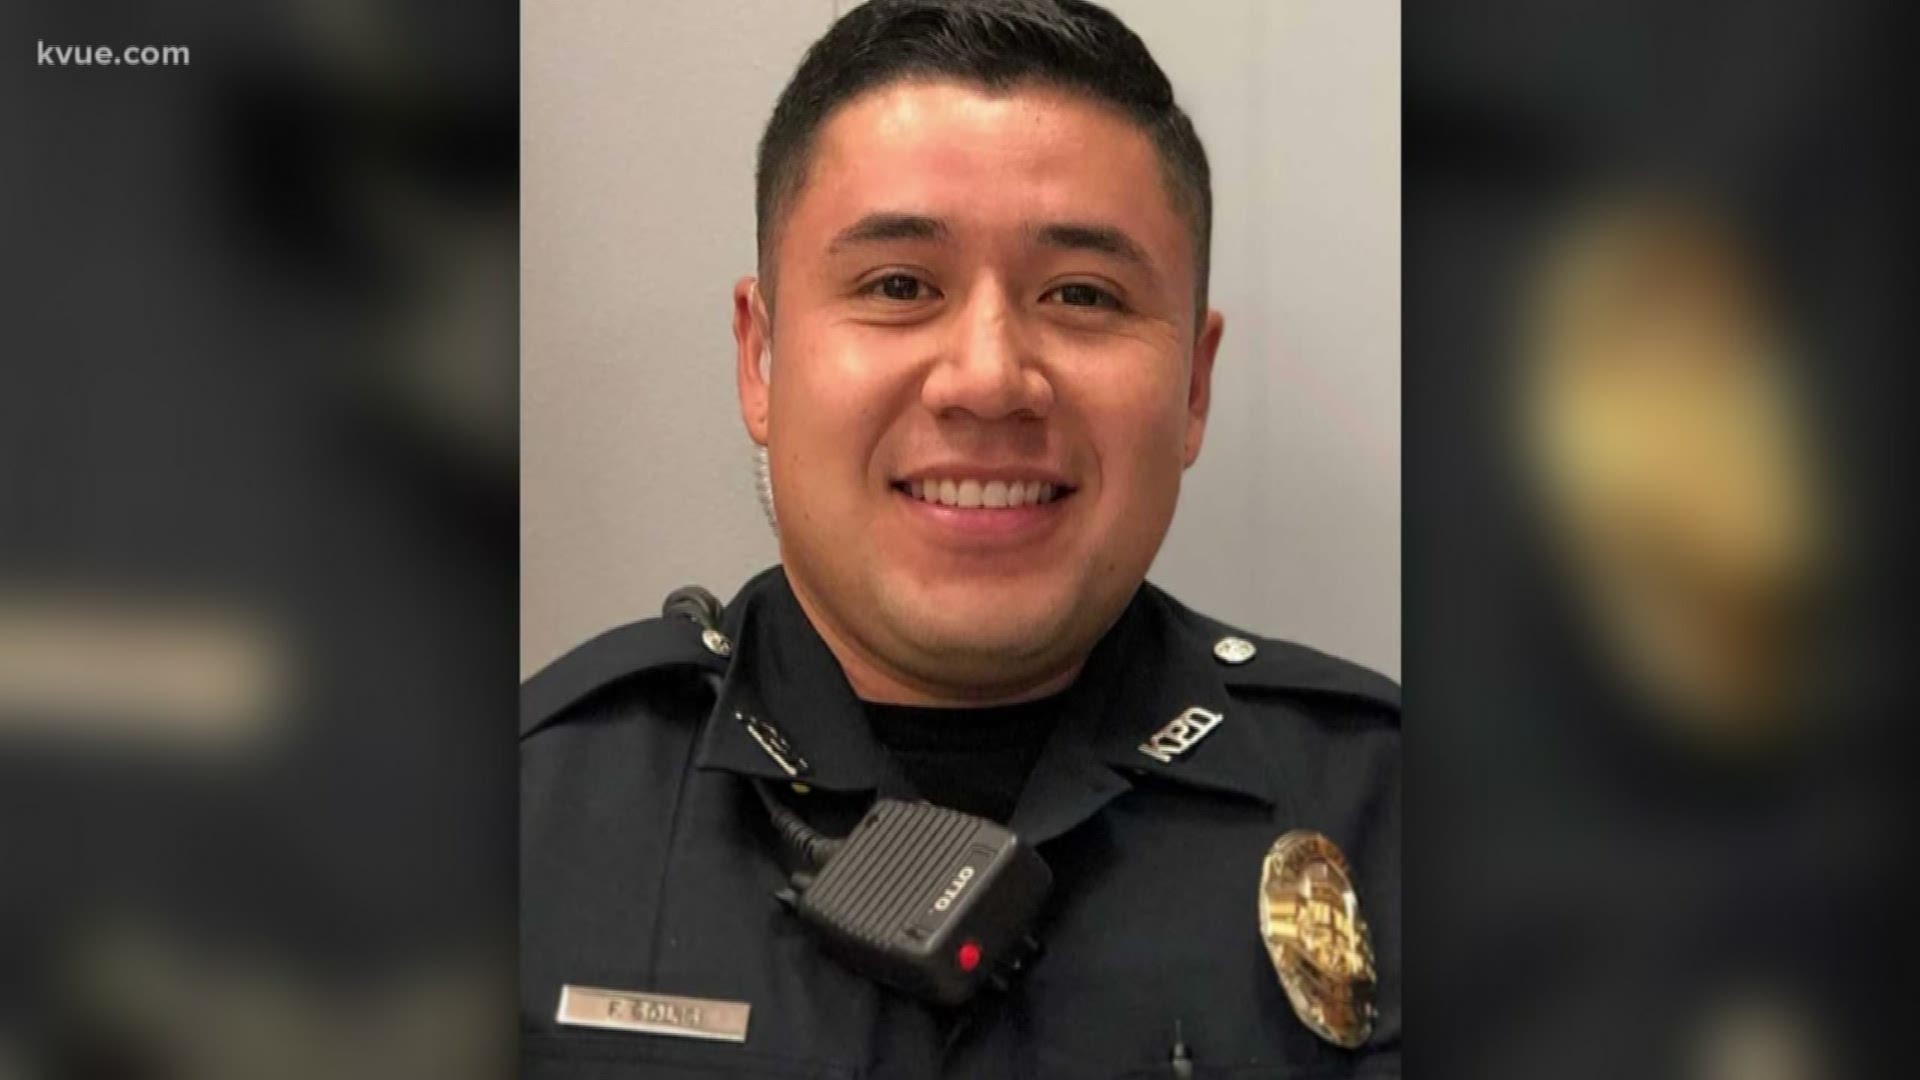 Off-duty Kyle police officer found dead identified